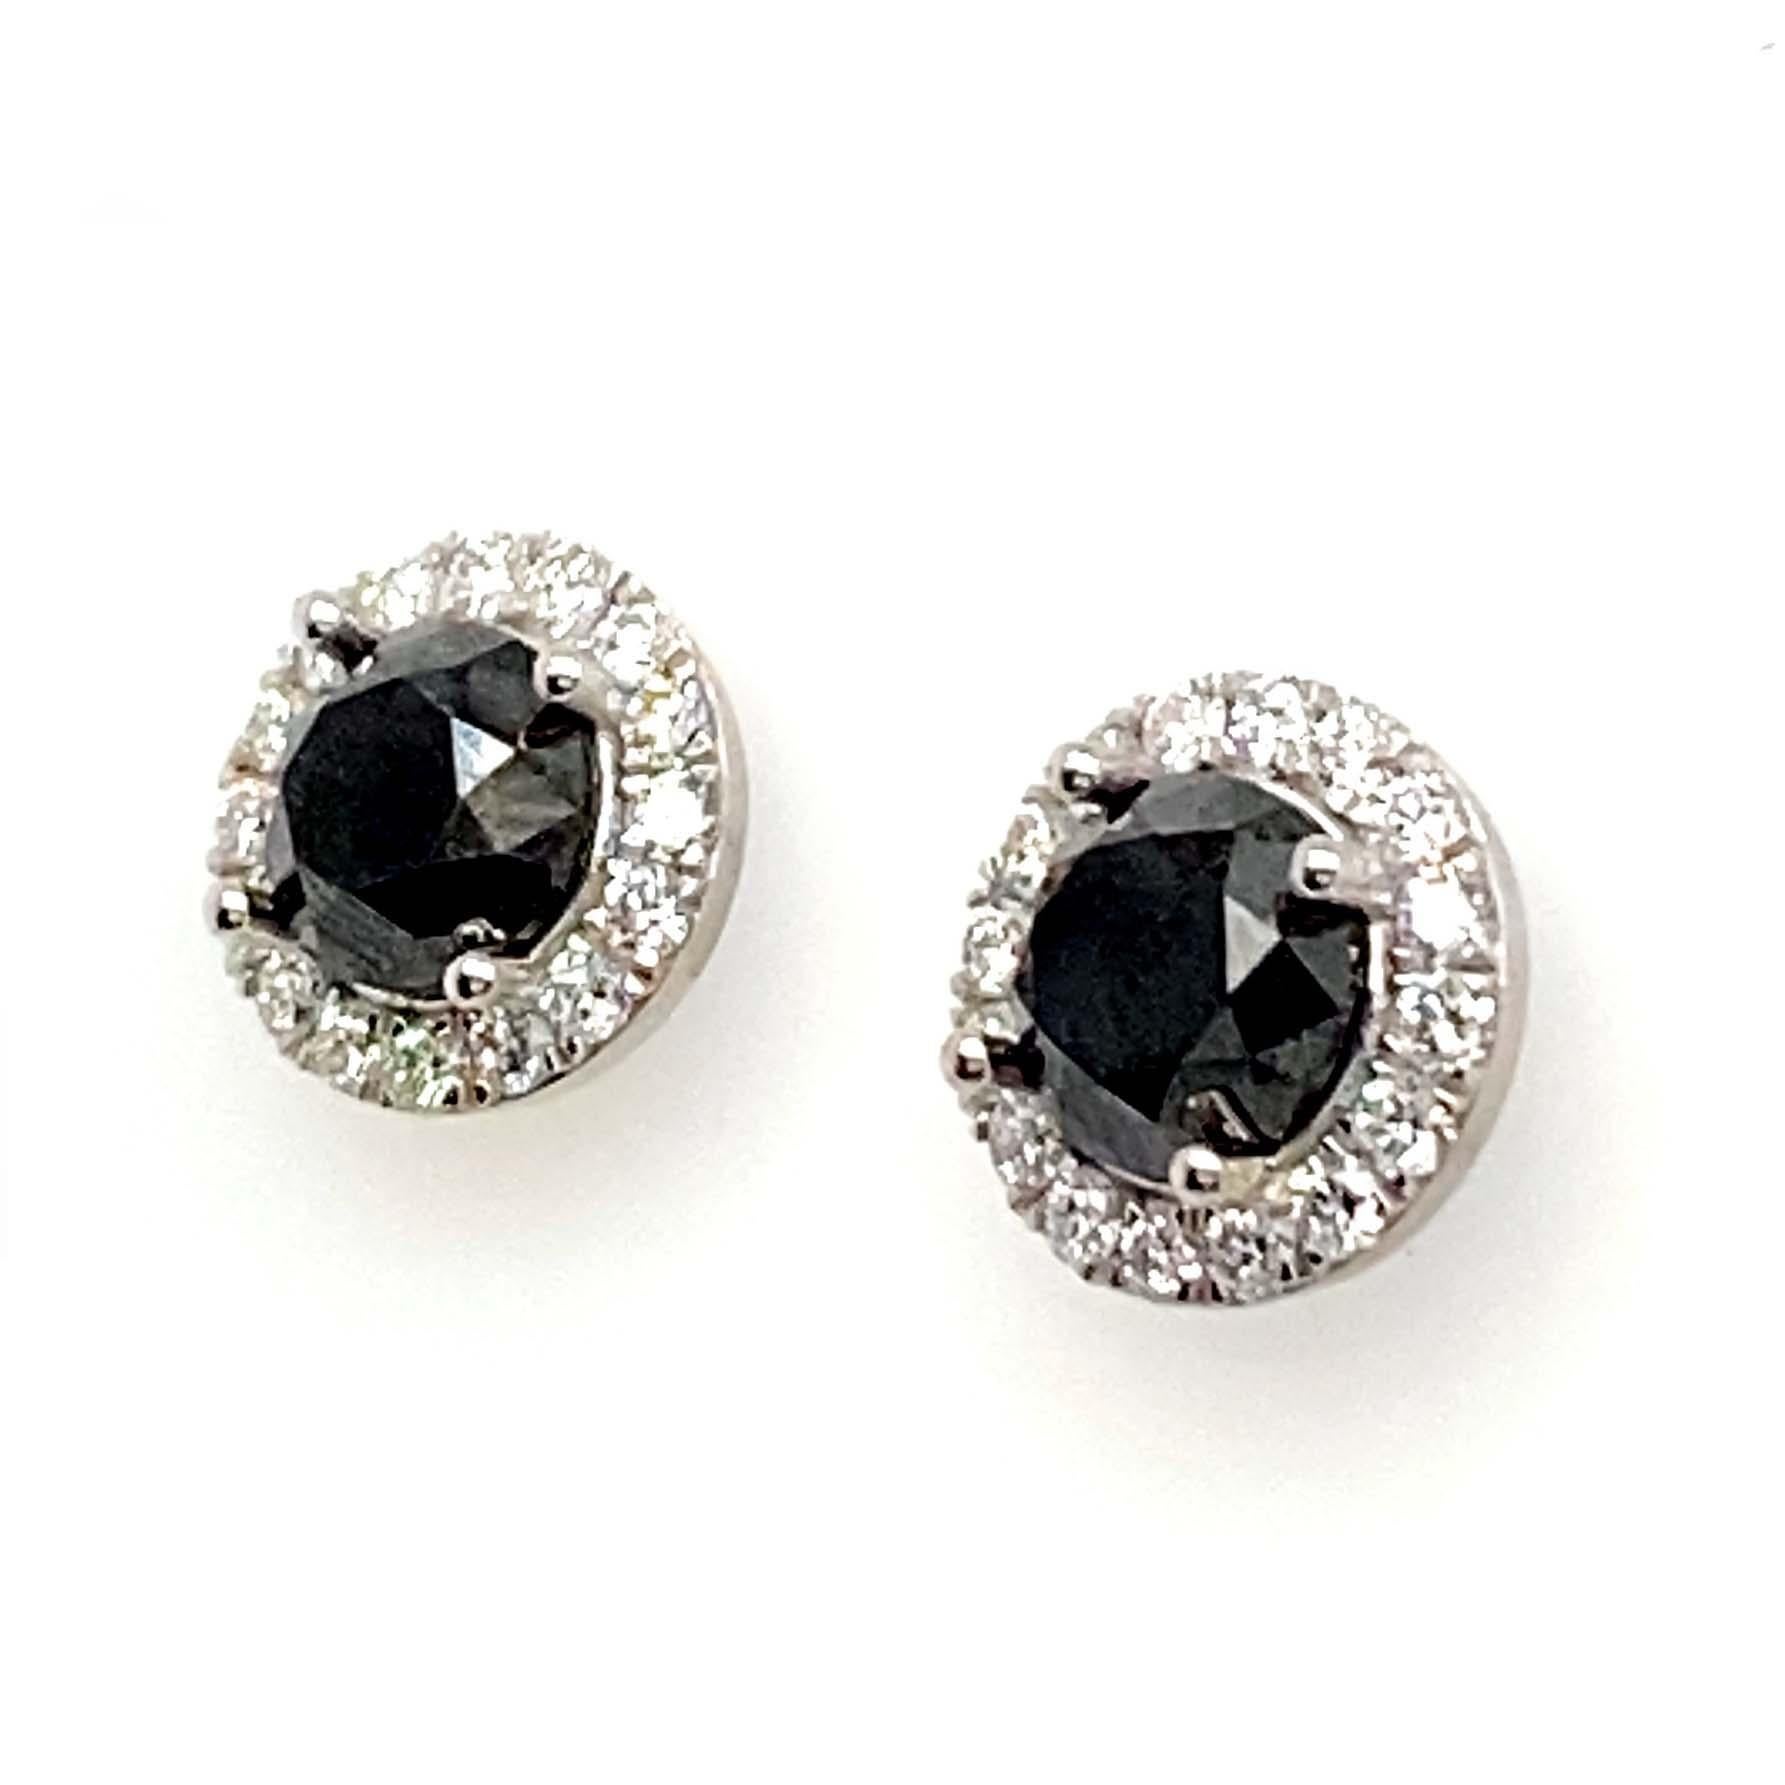 Immaculate black diamond earrings that are accented by white diamonds. These large 4-carat black diamond earring studs can be worn every day or dressed up with other diamond jewelry. Each Black diamond is surrounded by a halo of round-cut diamonds.